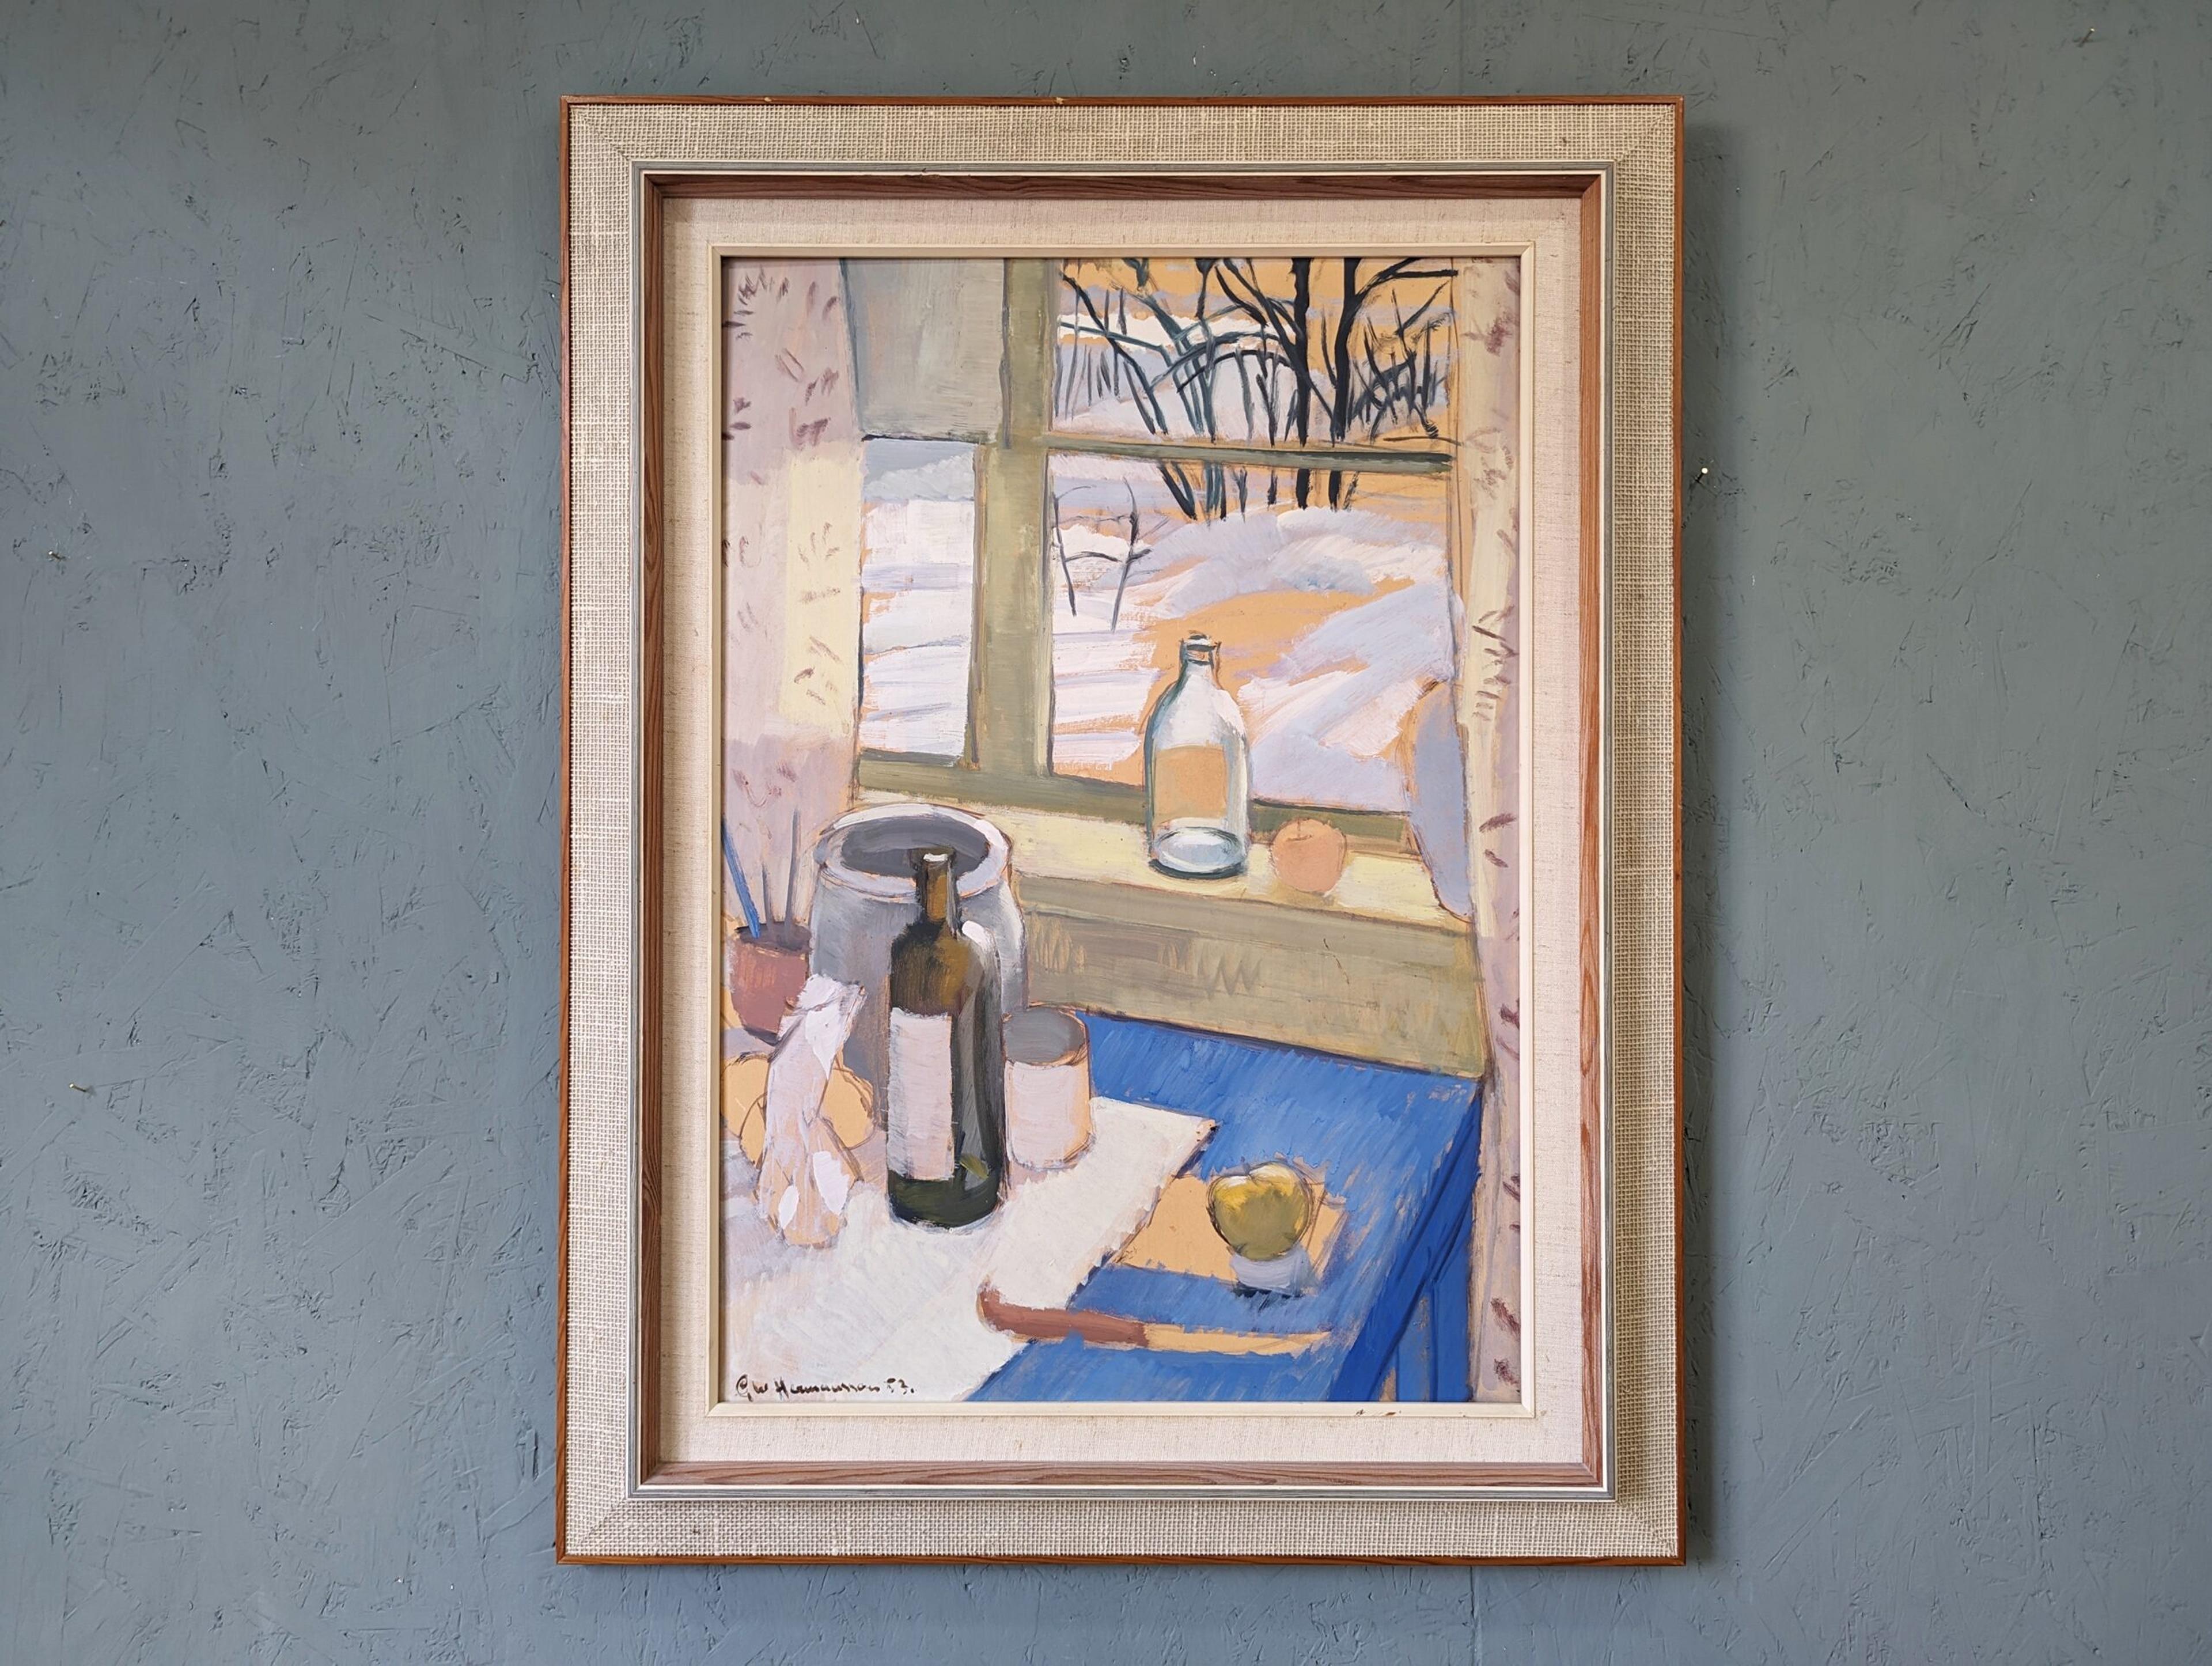 WINDOW TABLE SETTING
Size: 85.5 x 65.5 cm (including frame)
Oil on Card

A large and homely modernist still life composition, executed in oil and dated 1953.

The painting presents an interior scene, where a group of objects including a wine bottle,